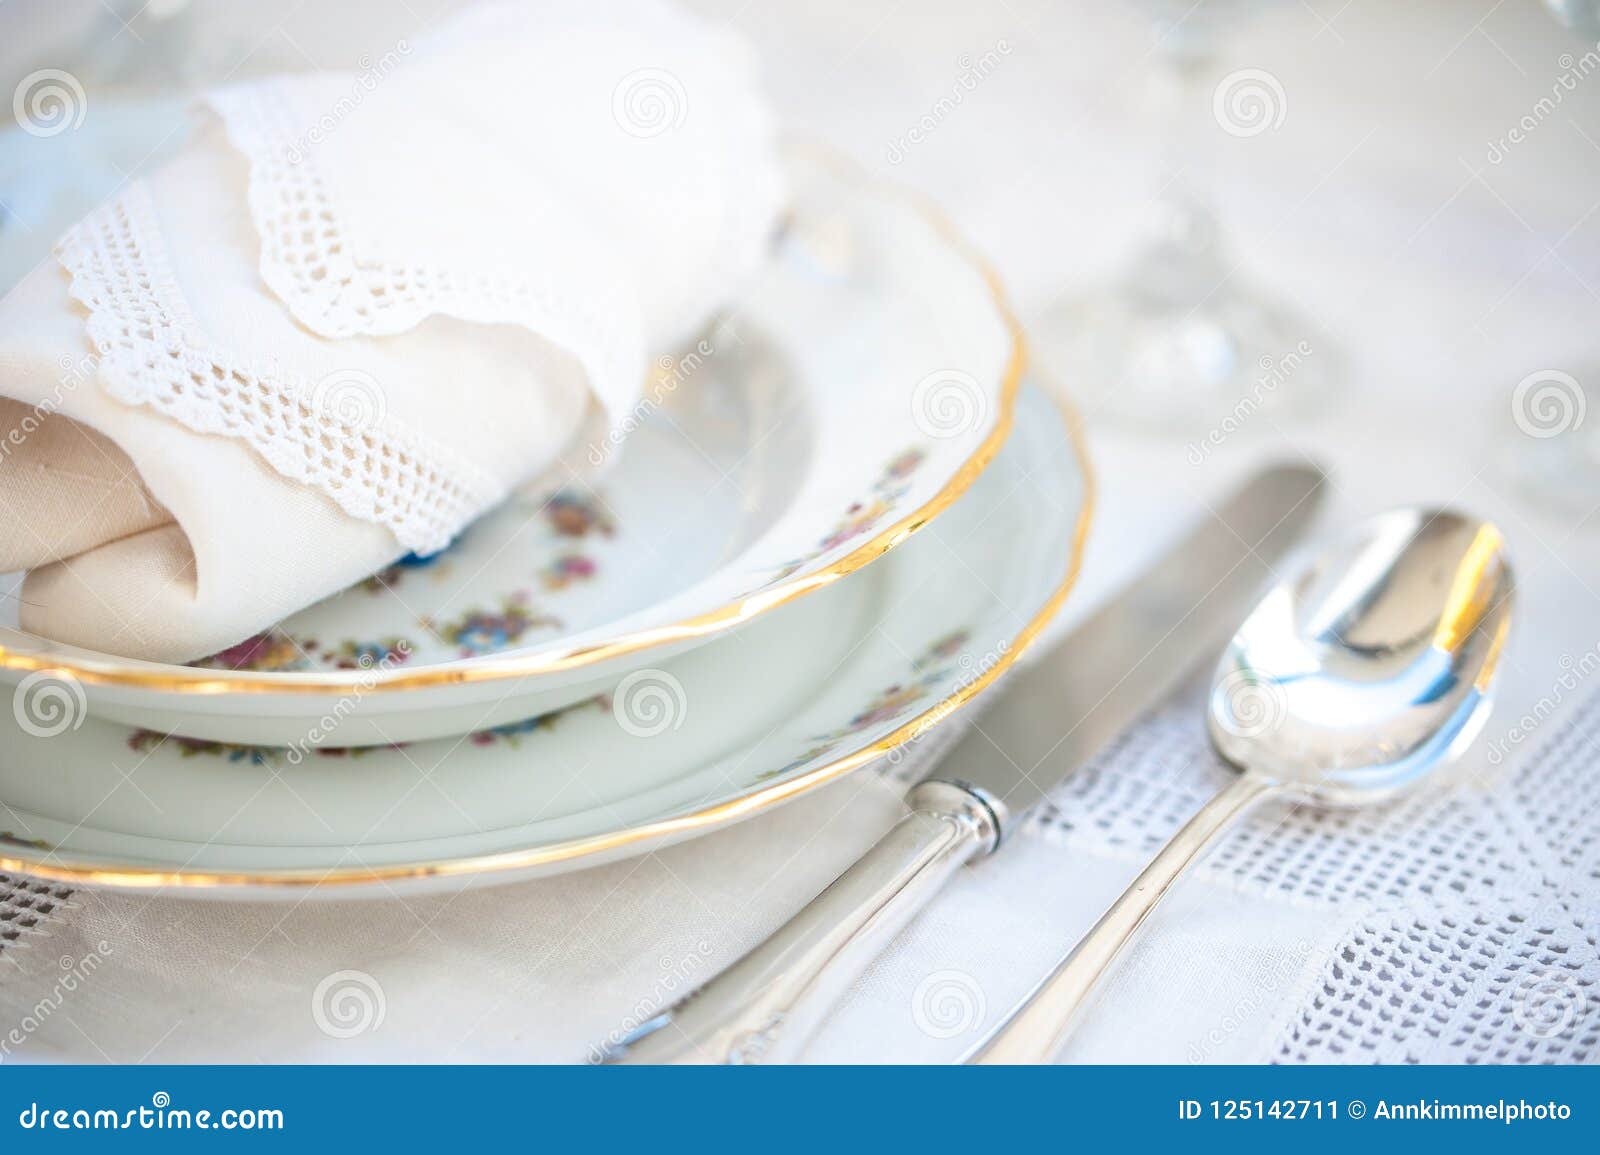 Porcelain Plates, Silver Cutlery and Crystal Glasses on an Antique ...